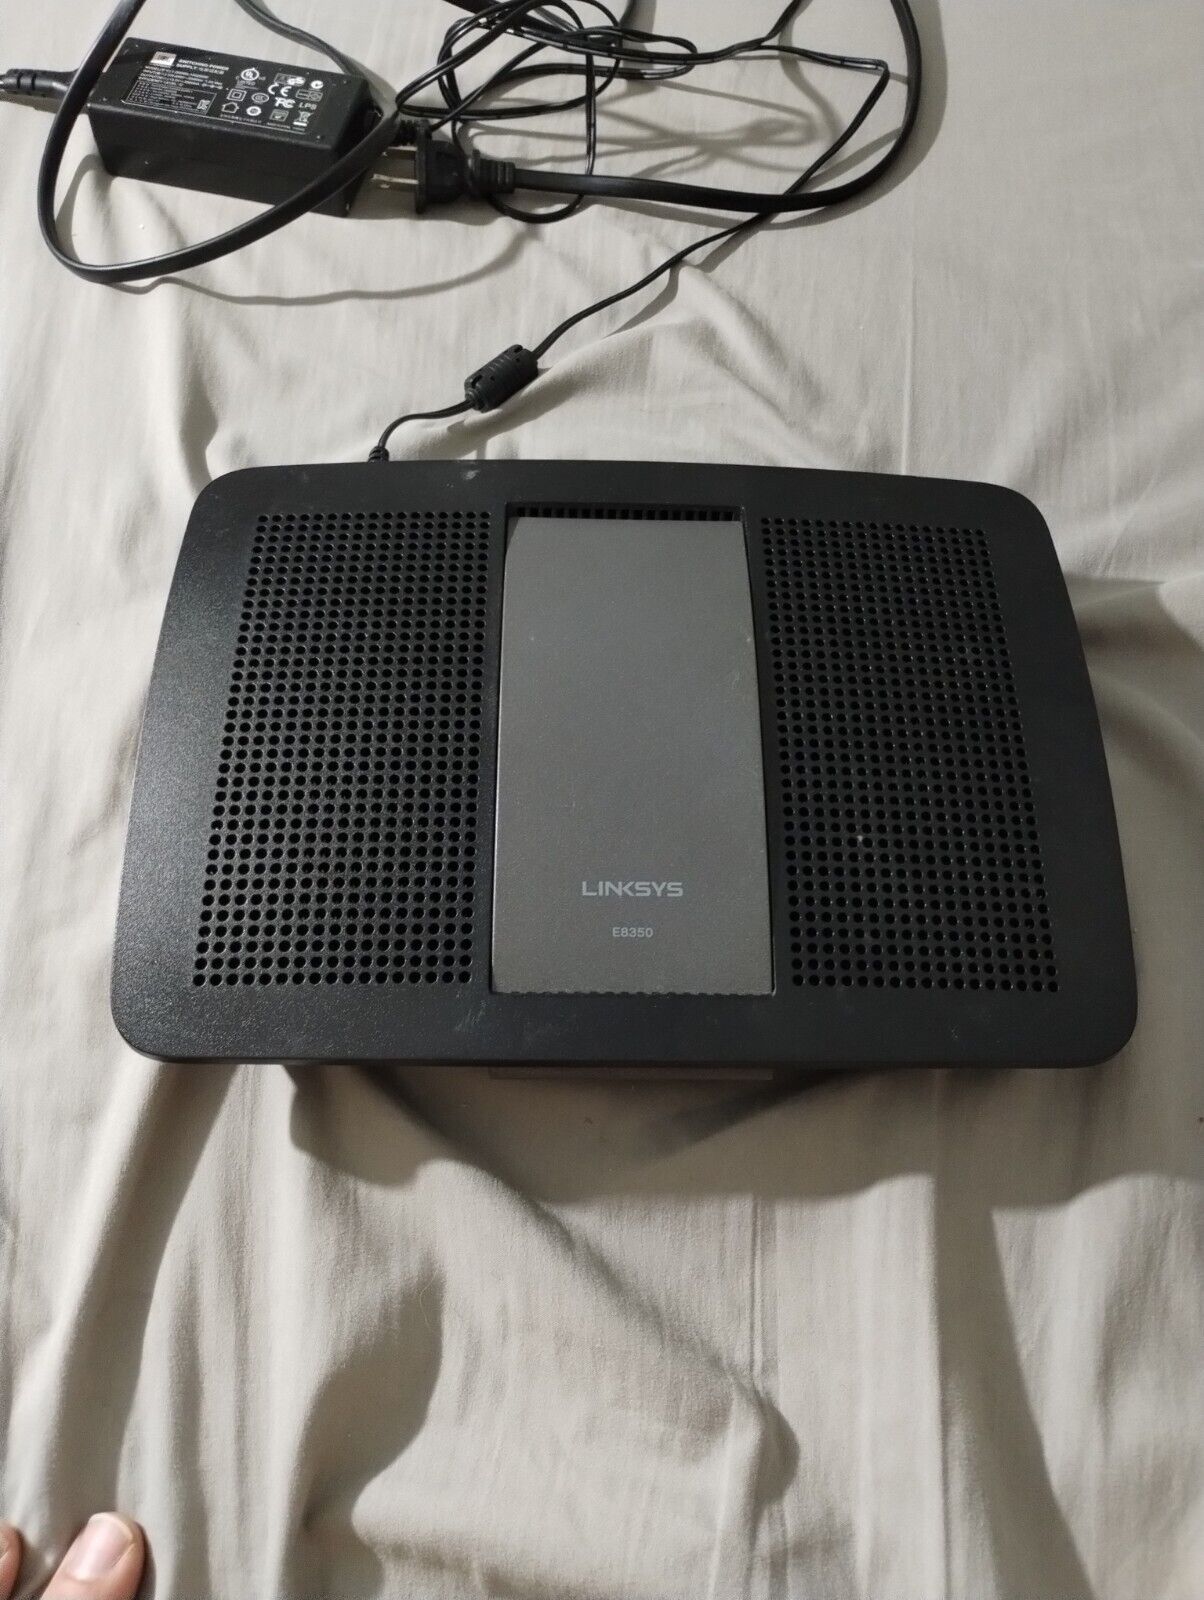 Linksys E835 Wireless Router 